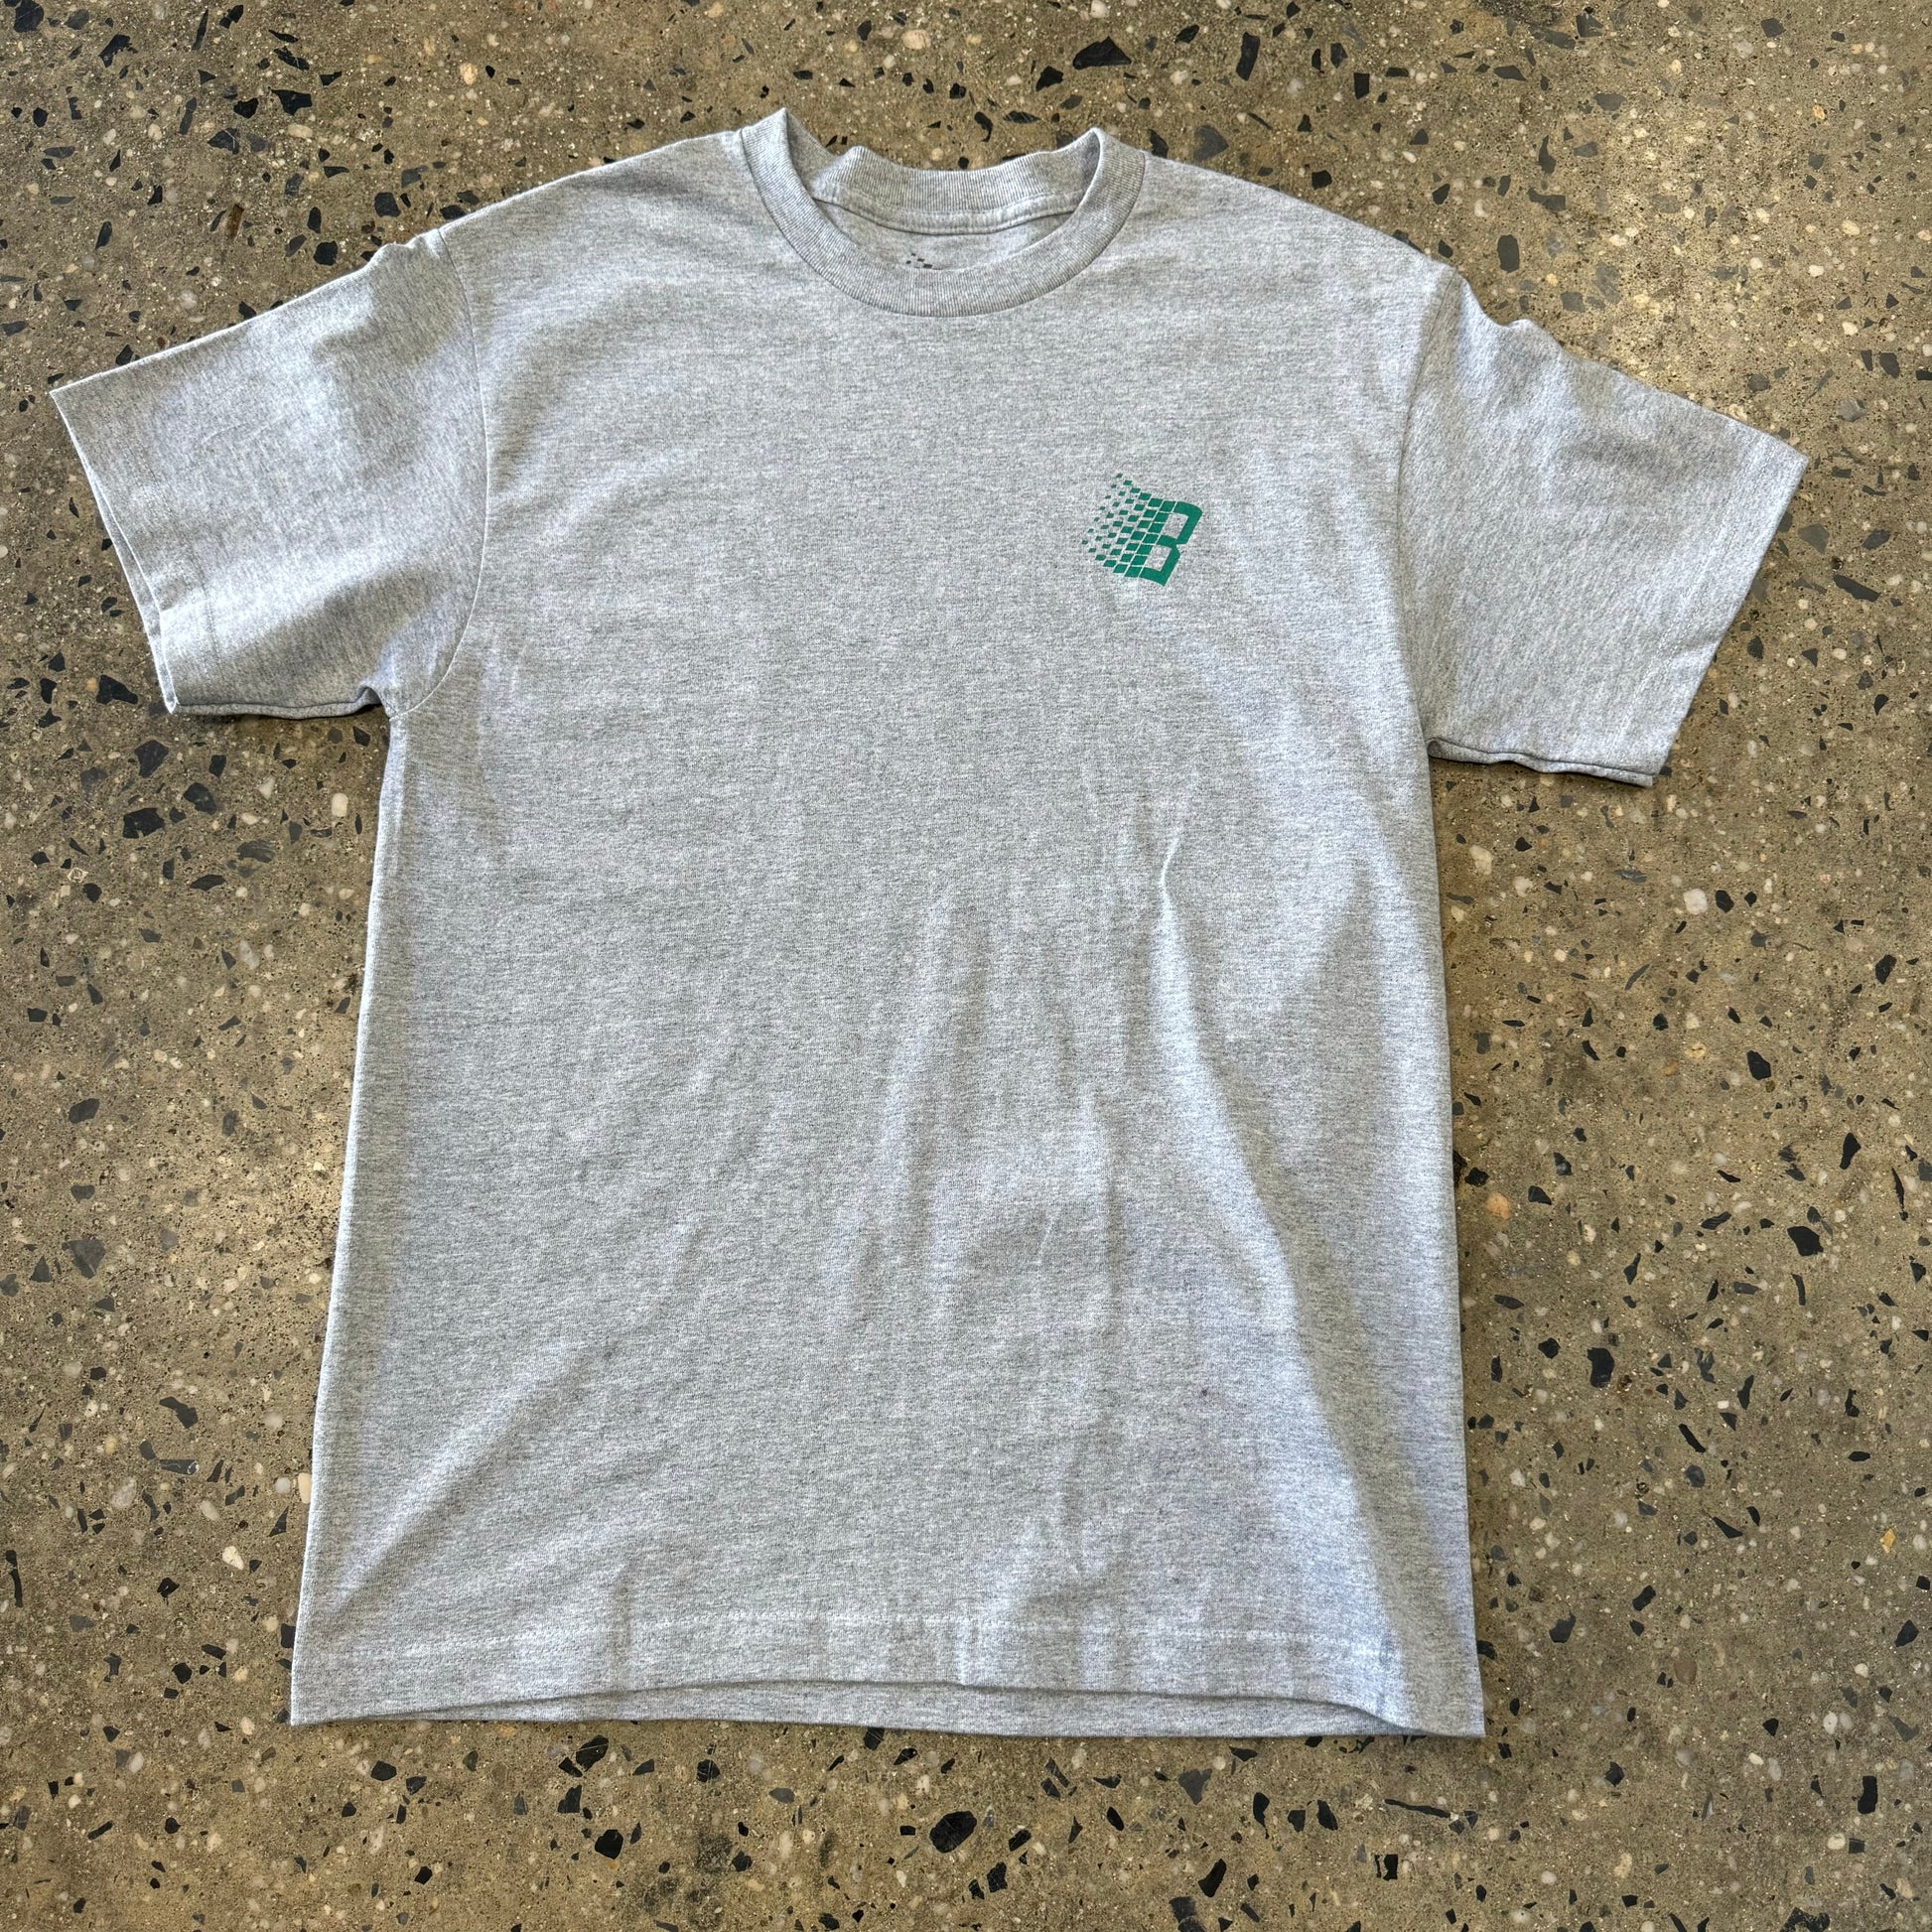 heather grey T-shirt with small green Bronze logo on front and large green logo on back